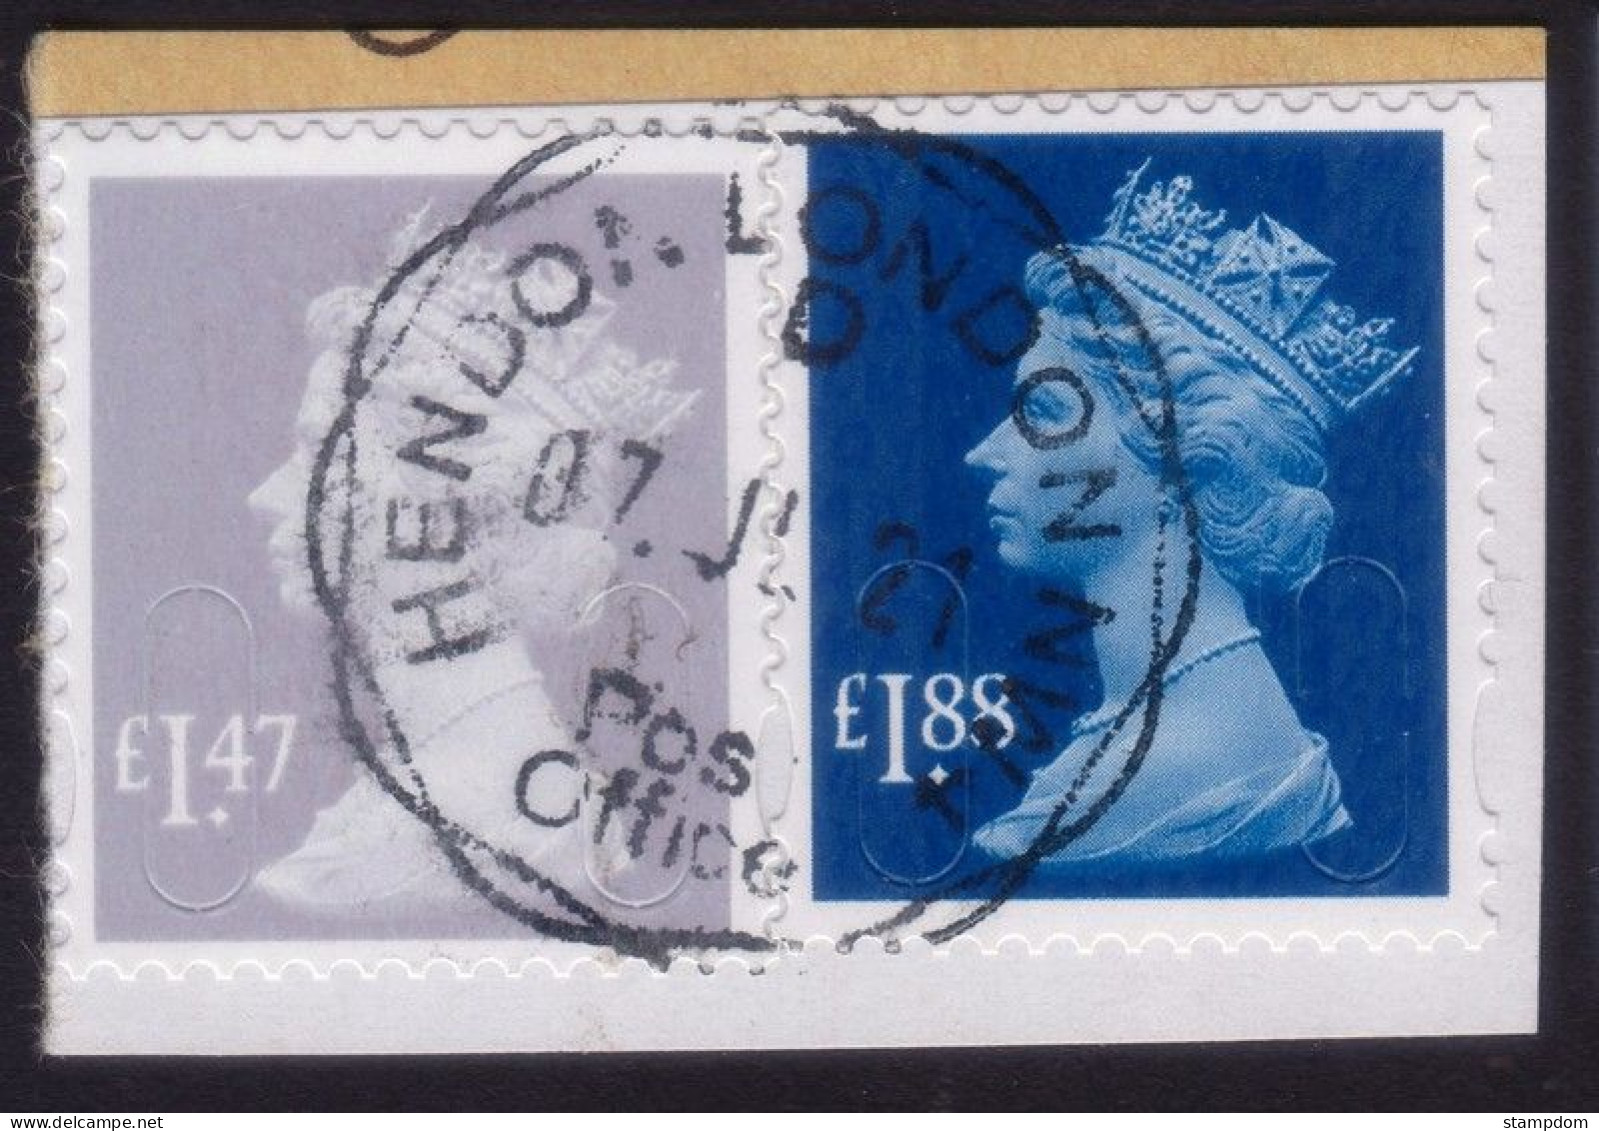 GREAT BRITAIN £1.47 (M4L) And £1.88 (MA13) Machin - USED On Paper "Hendon London NW4" Pmk @Q2795 - Série 'Machin'